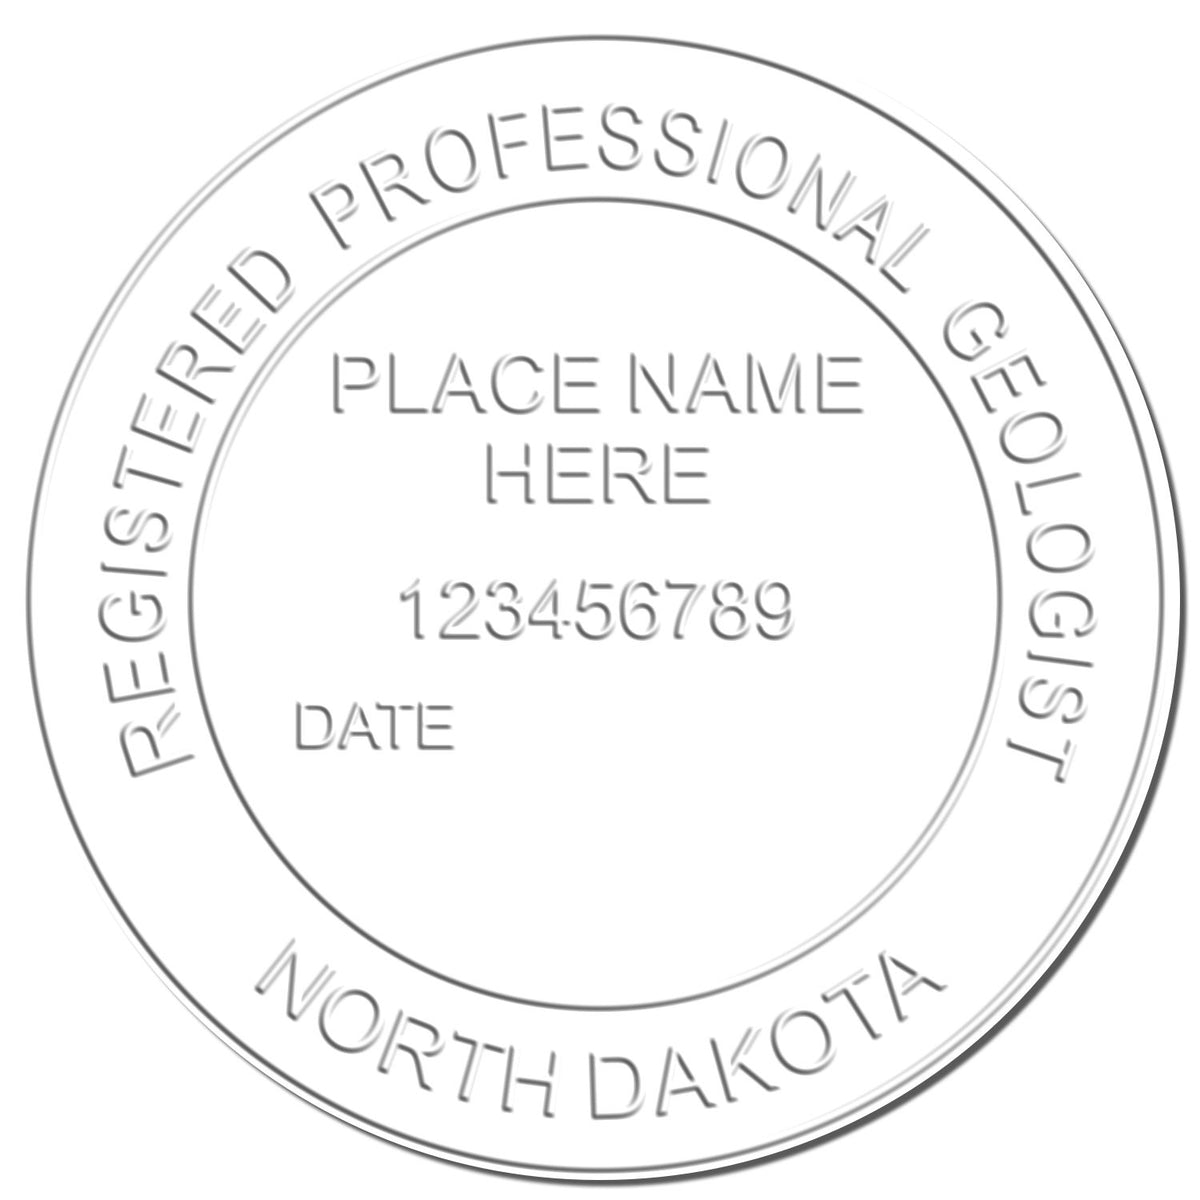 A photograph of the State of North Dakota Extended Long Reach Geologist Seal stamp impression reveals a vivid, professional image of the on paper.